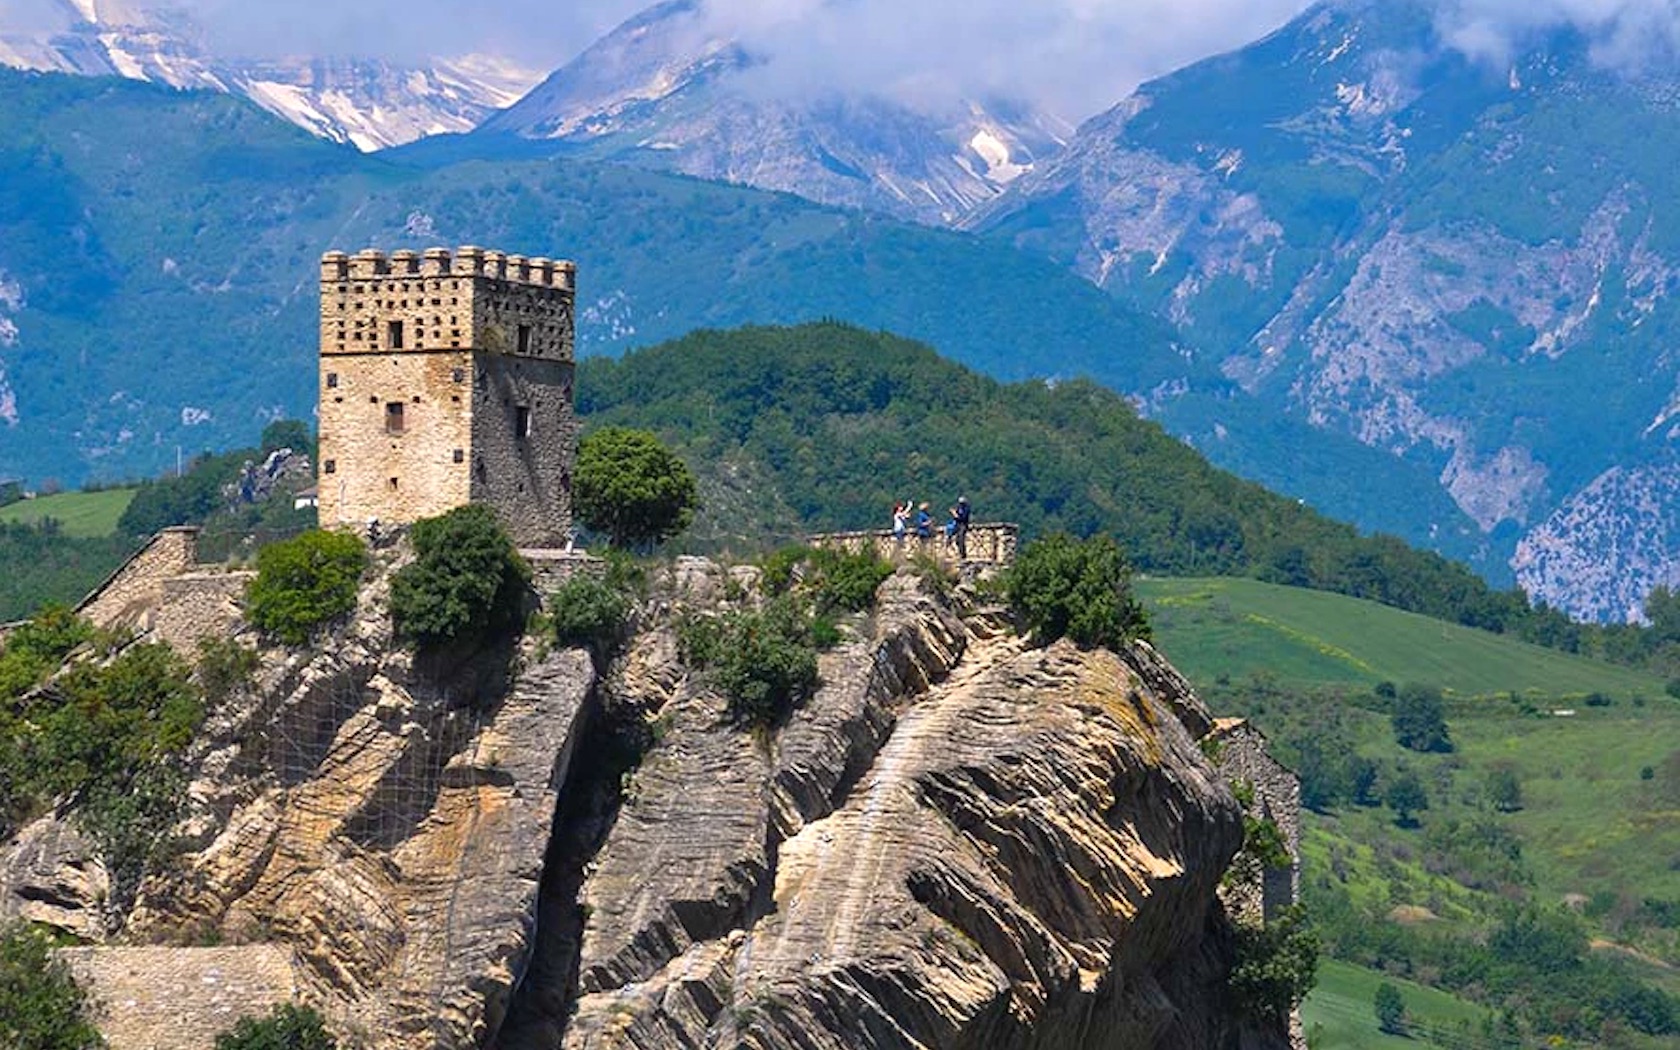 The castle hotel Castello Roccascalegna in Italy, perched on a craggy hill.